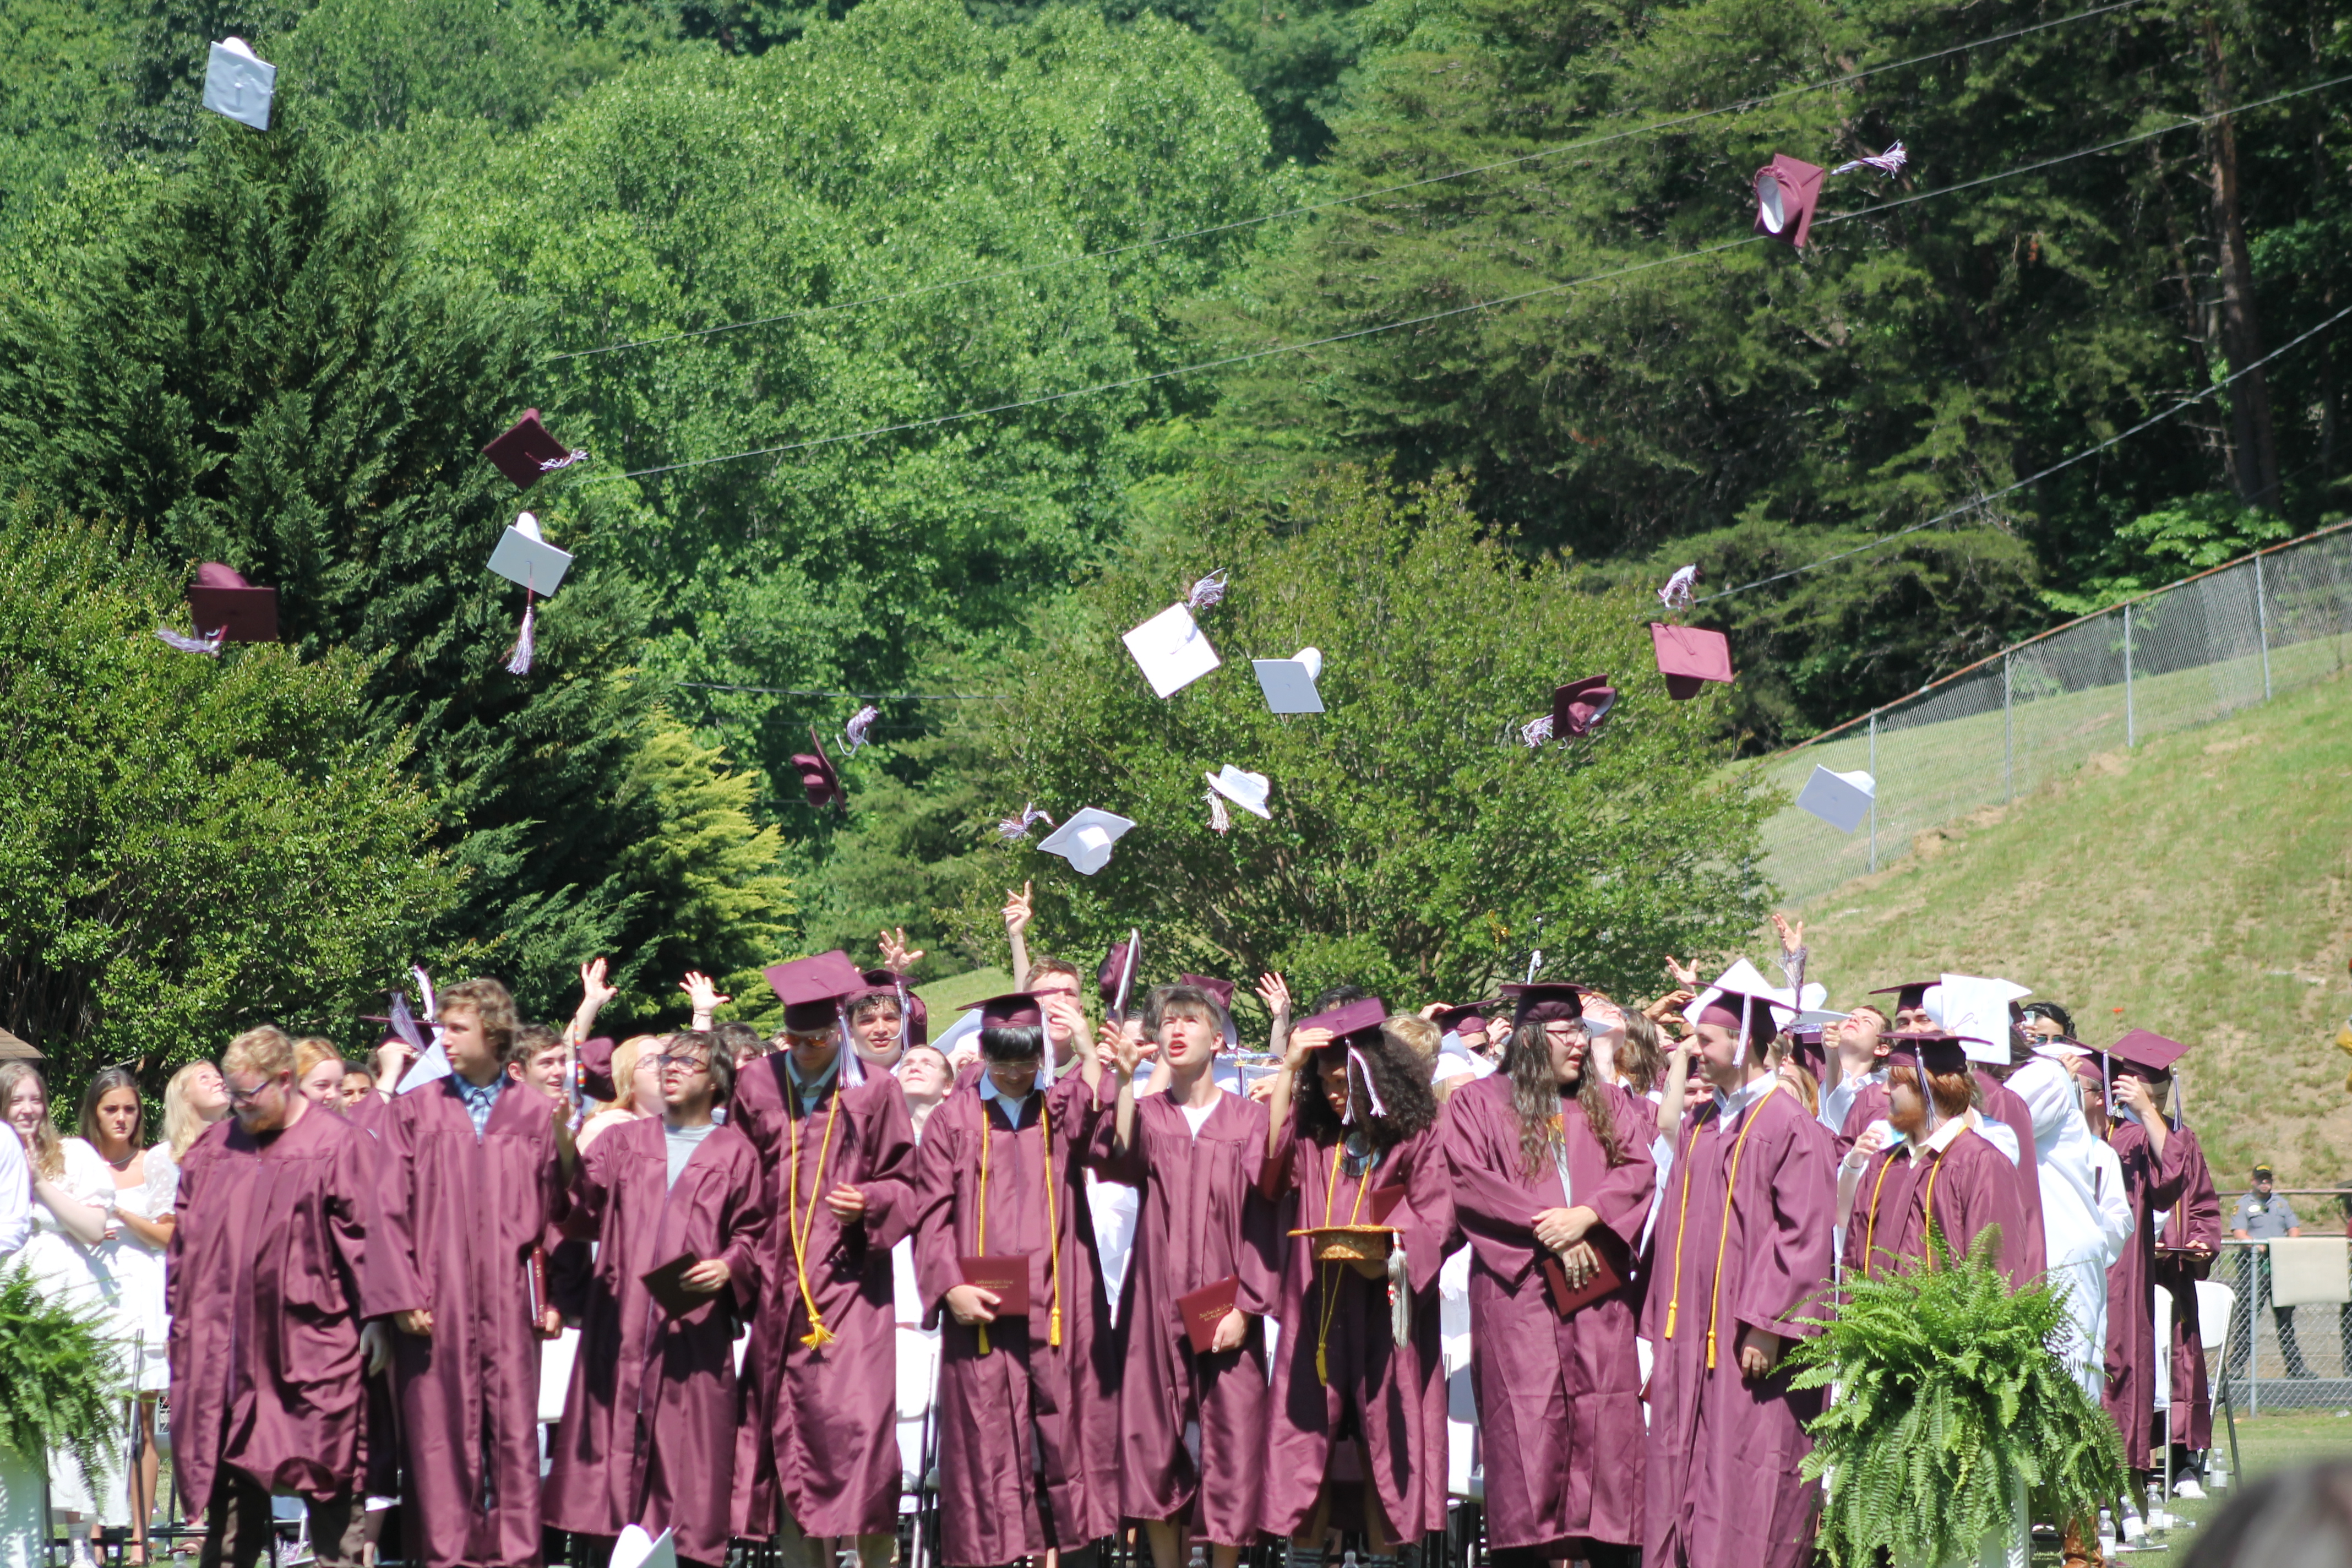 The class of 2022 threw their graduation caps in the air after being declared Swain County High School graduates at the graduation ceremony held this past Saturday, June 4. 